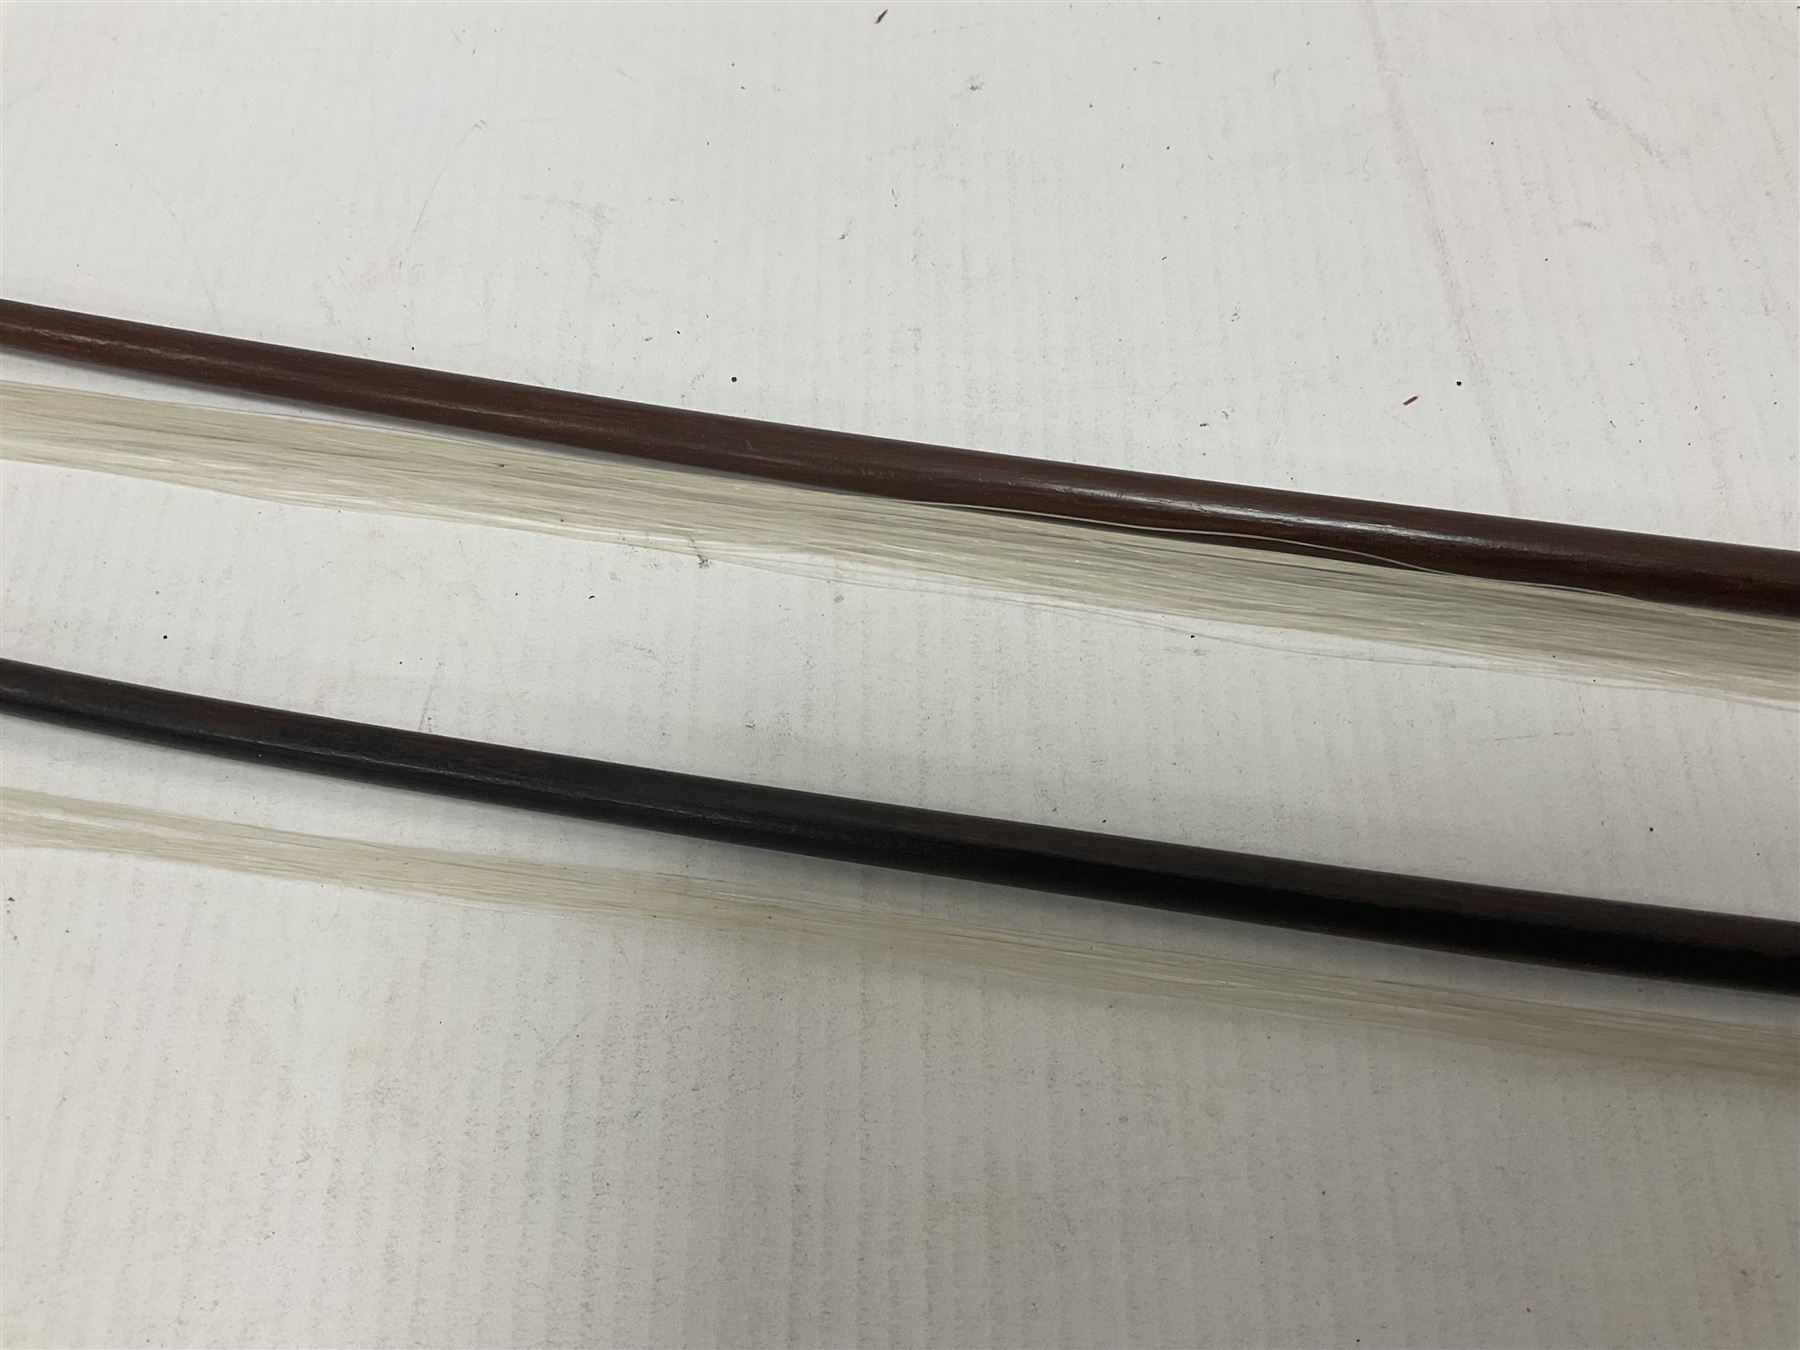 Two wooden violin bows - Image 8 of 12